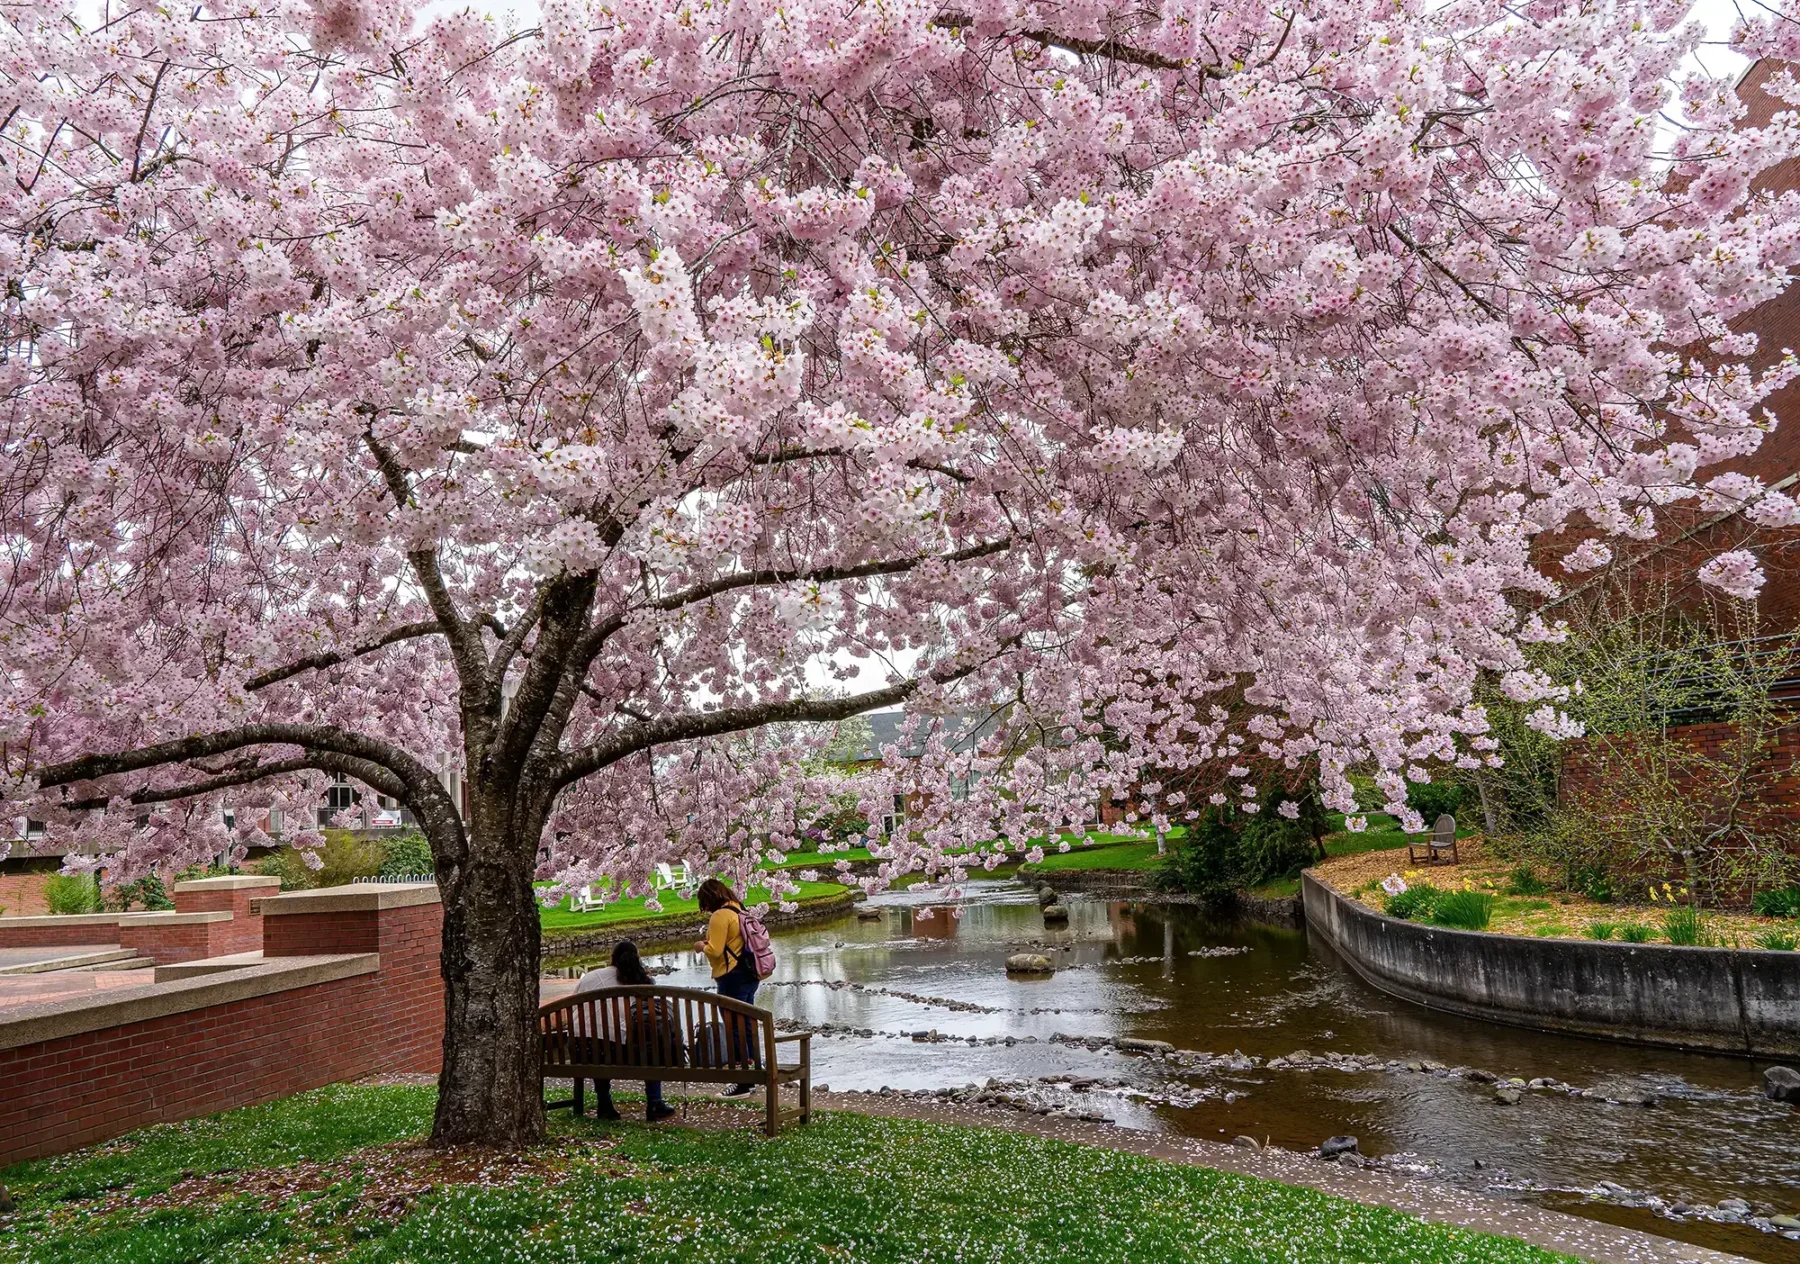 A large blossoming cherry tree covered in pink flowers with a bench underneath it